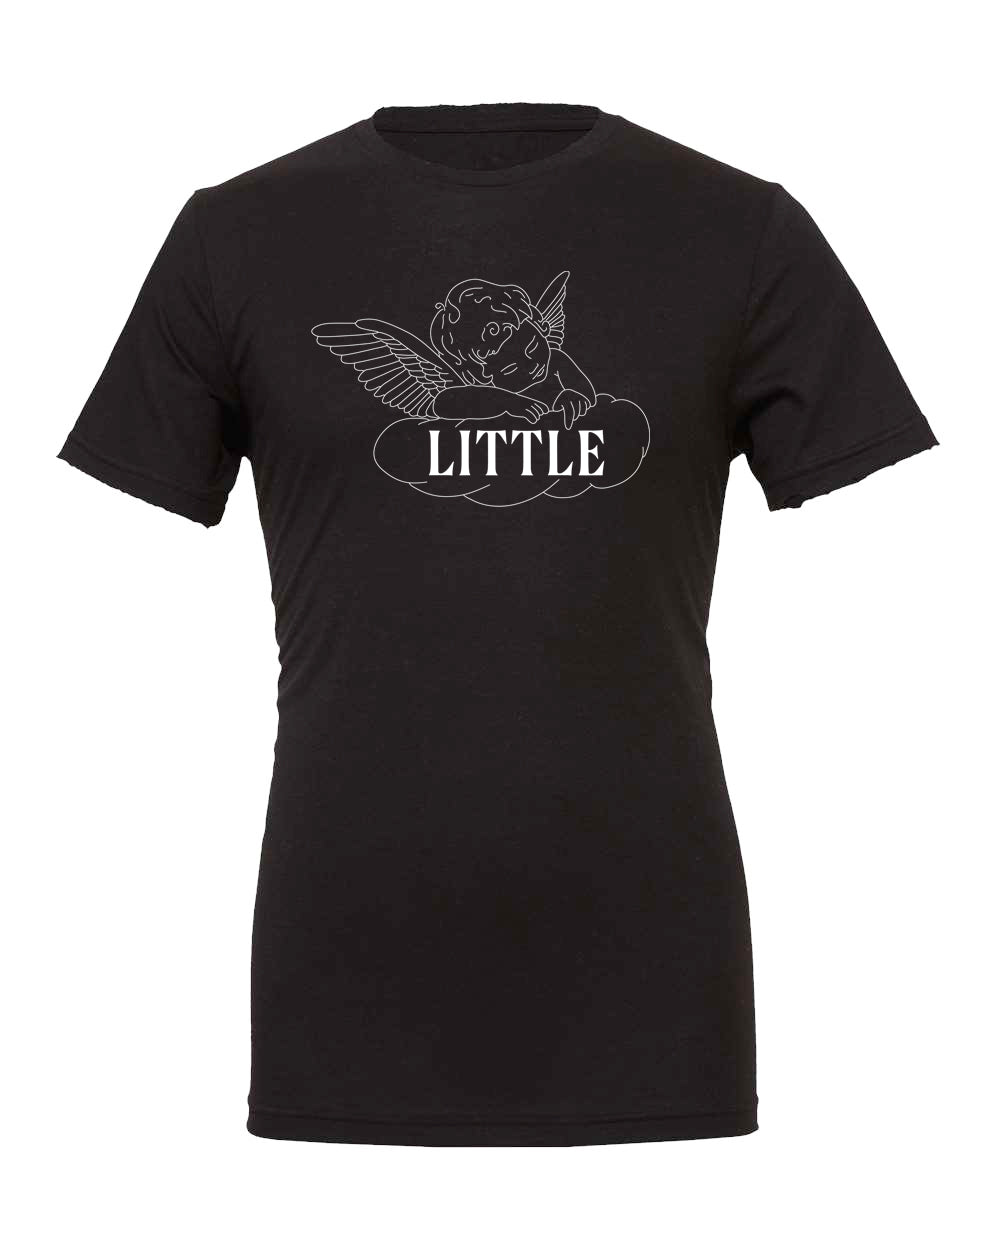 a black t - shirt with the words little on it